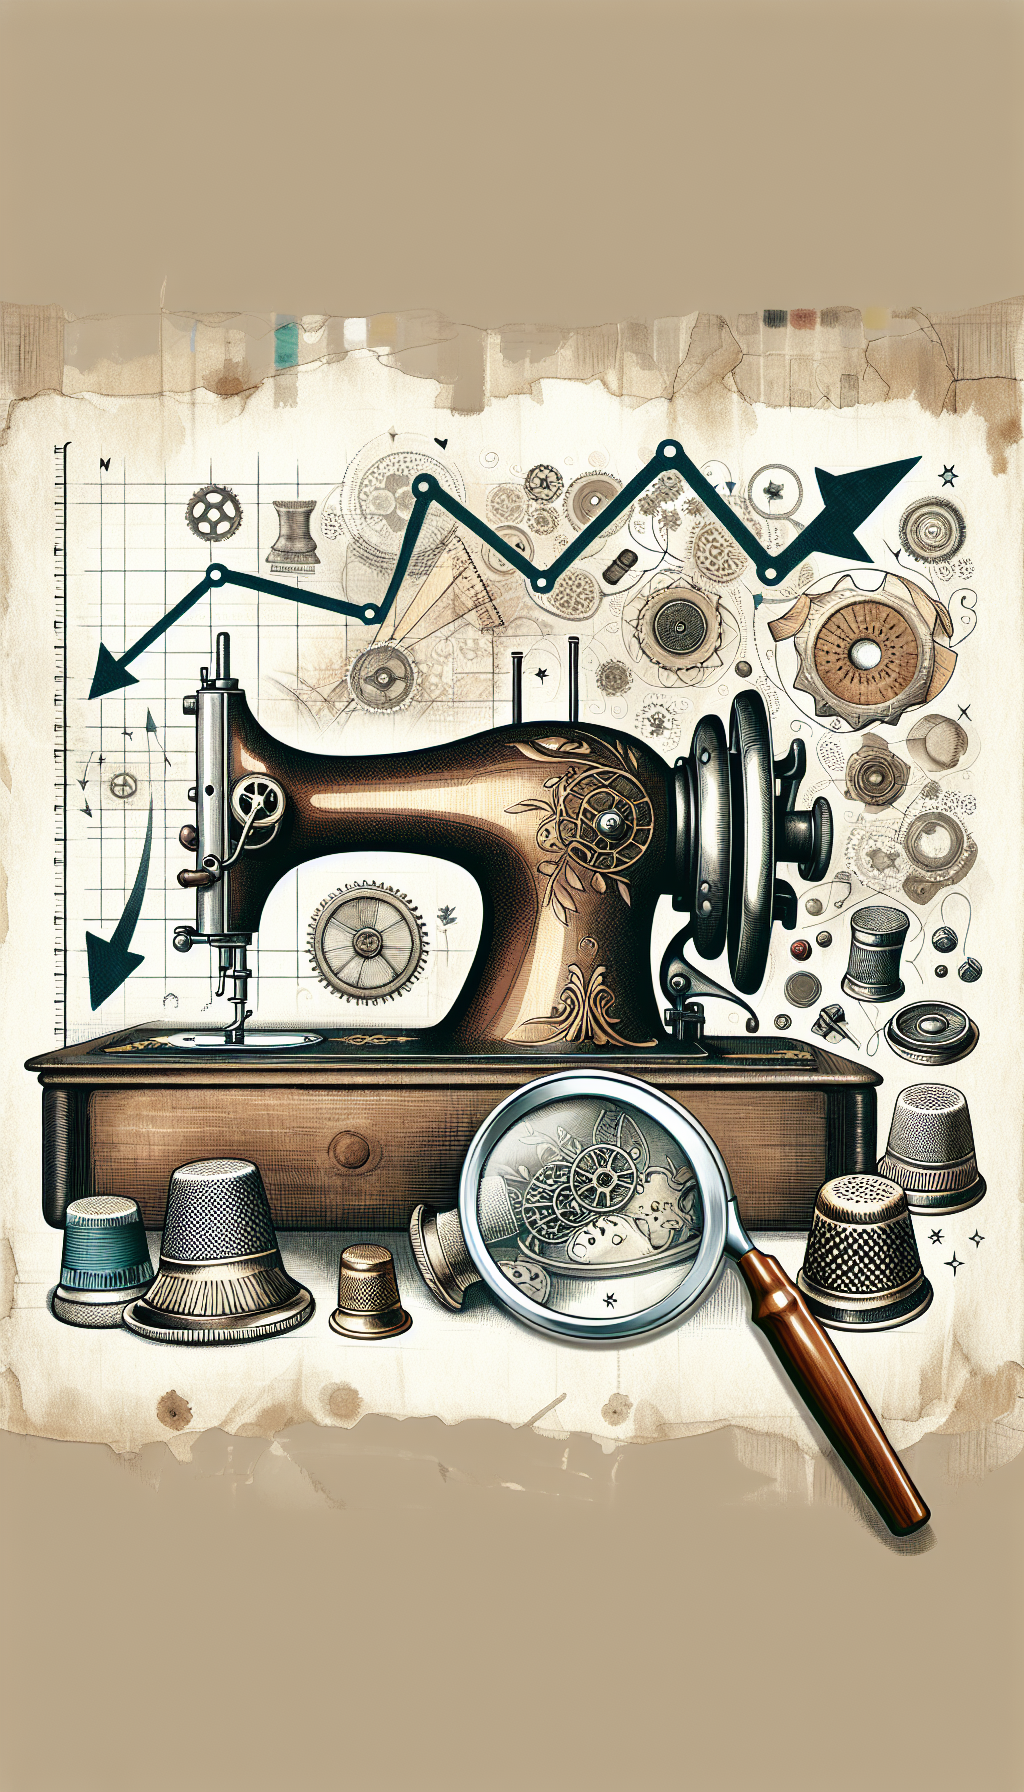 An illustration featuring an antique sewing machine on a graph with ascending arrows and scattered vintage patterns and rare thimbles representing market trends. A magnifying glass highlights the machine's unique details, symbolizing rarity's role in value assessment. The scene is rendered in a mix of watercolor elements for the machine's patina and crisp line art for the modern graph.